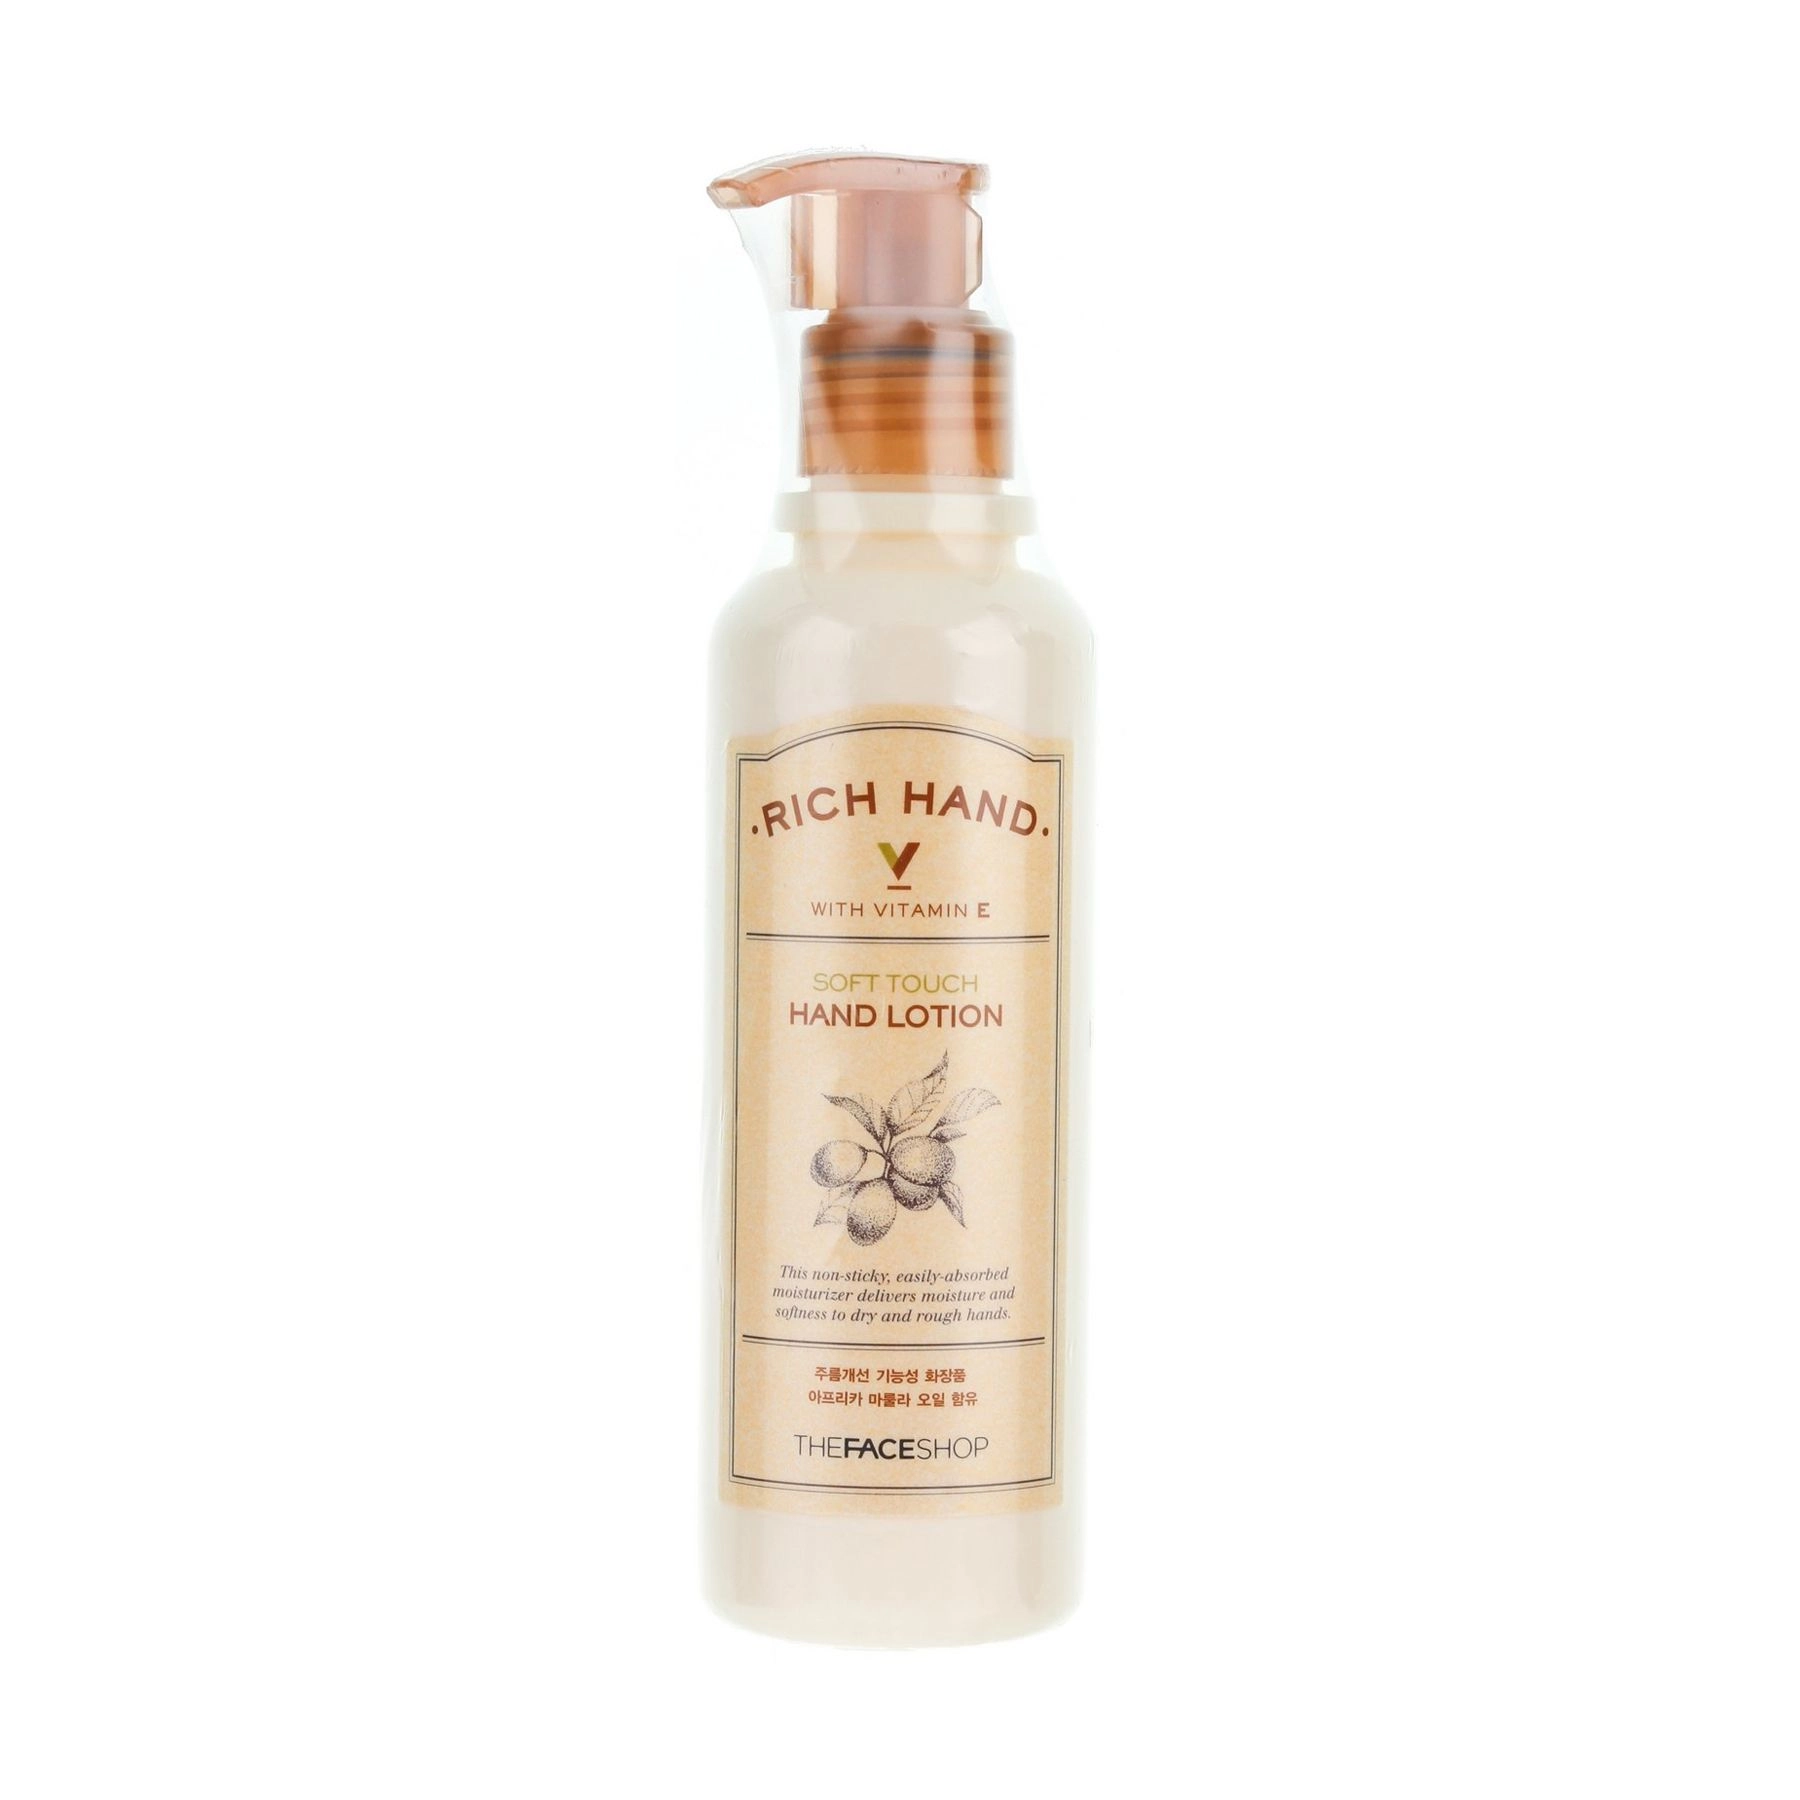 The Face Shop Лосьйон для рук Rich Hand V Soft Touch Hand Lotion з олією марули, 200 мл - фото N1